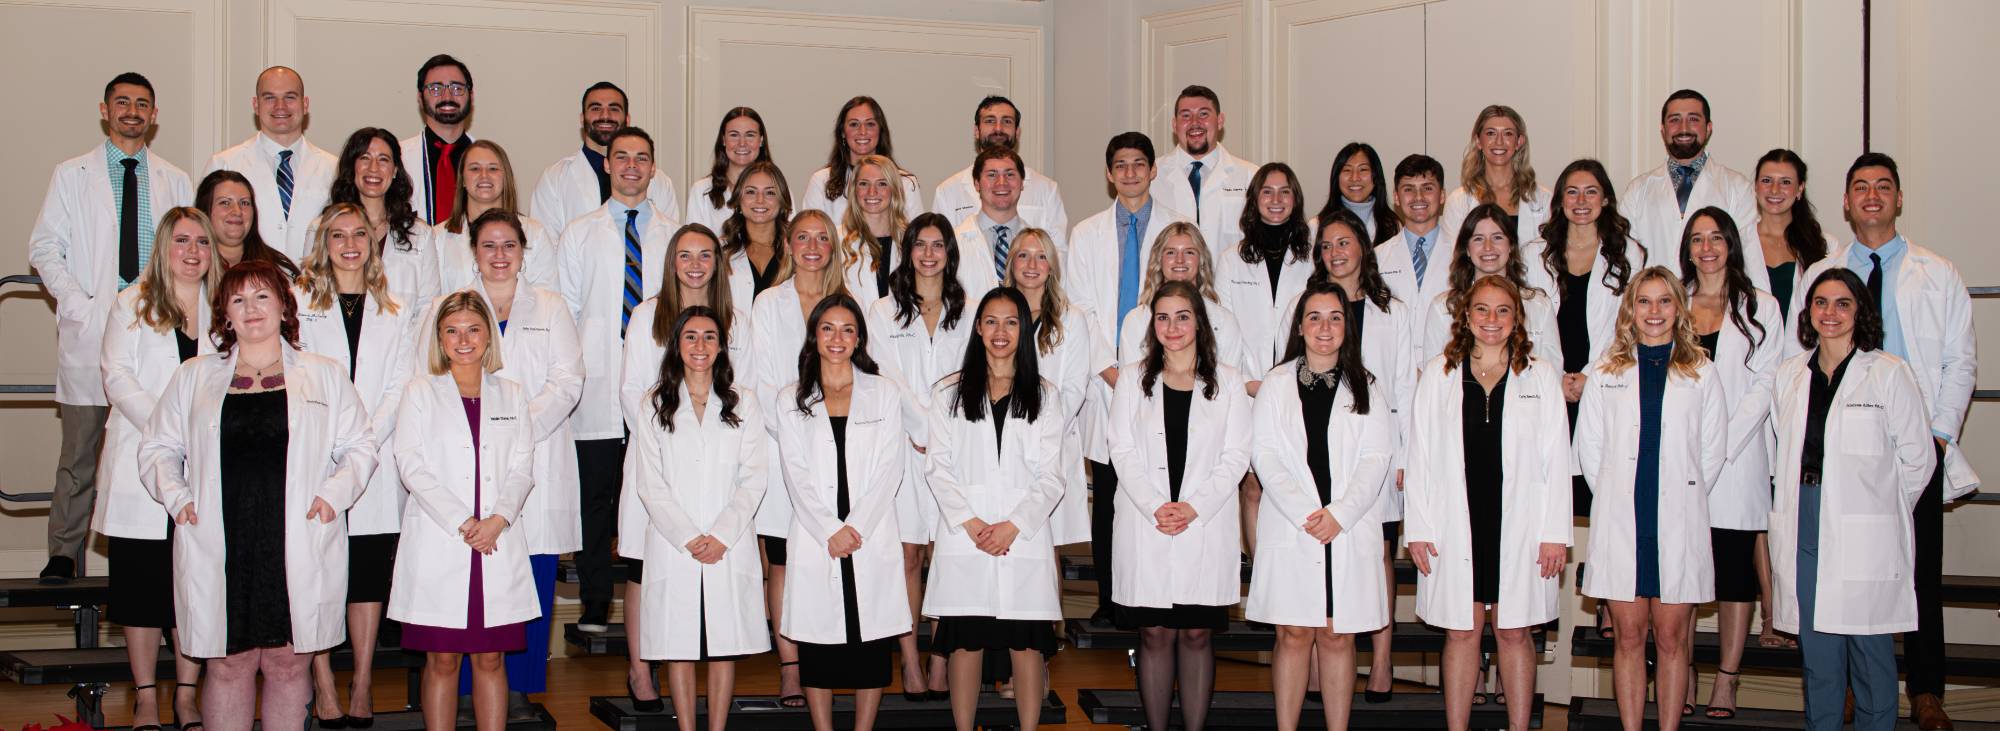 Physician Assistant Class of 2023 Graduates